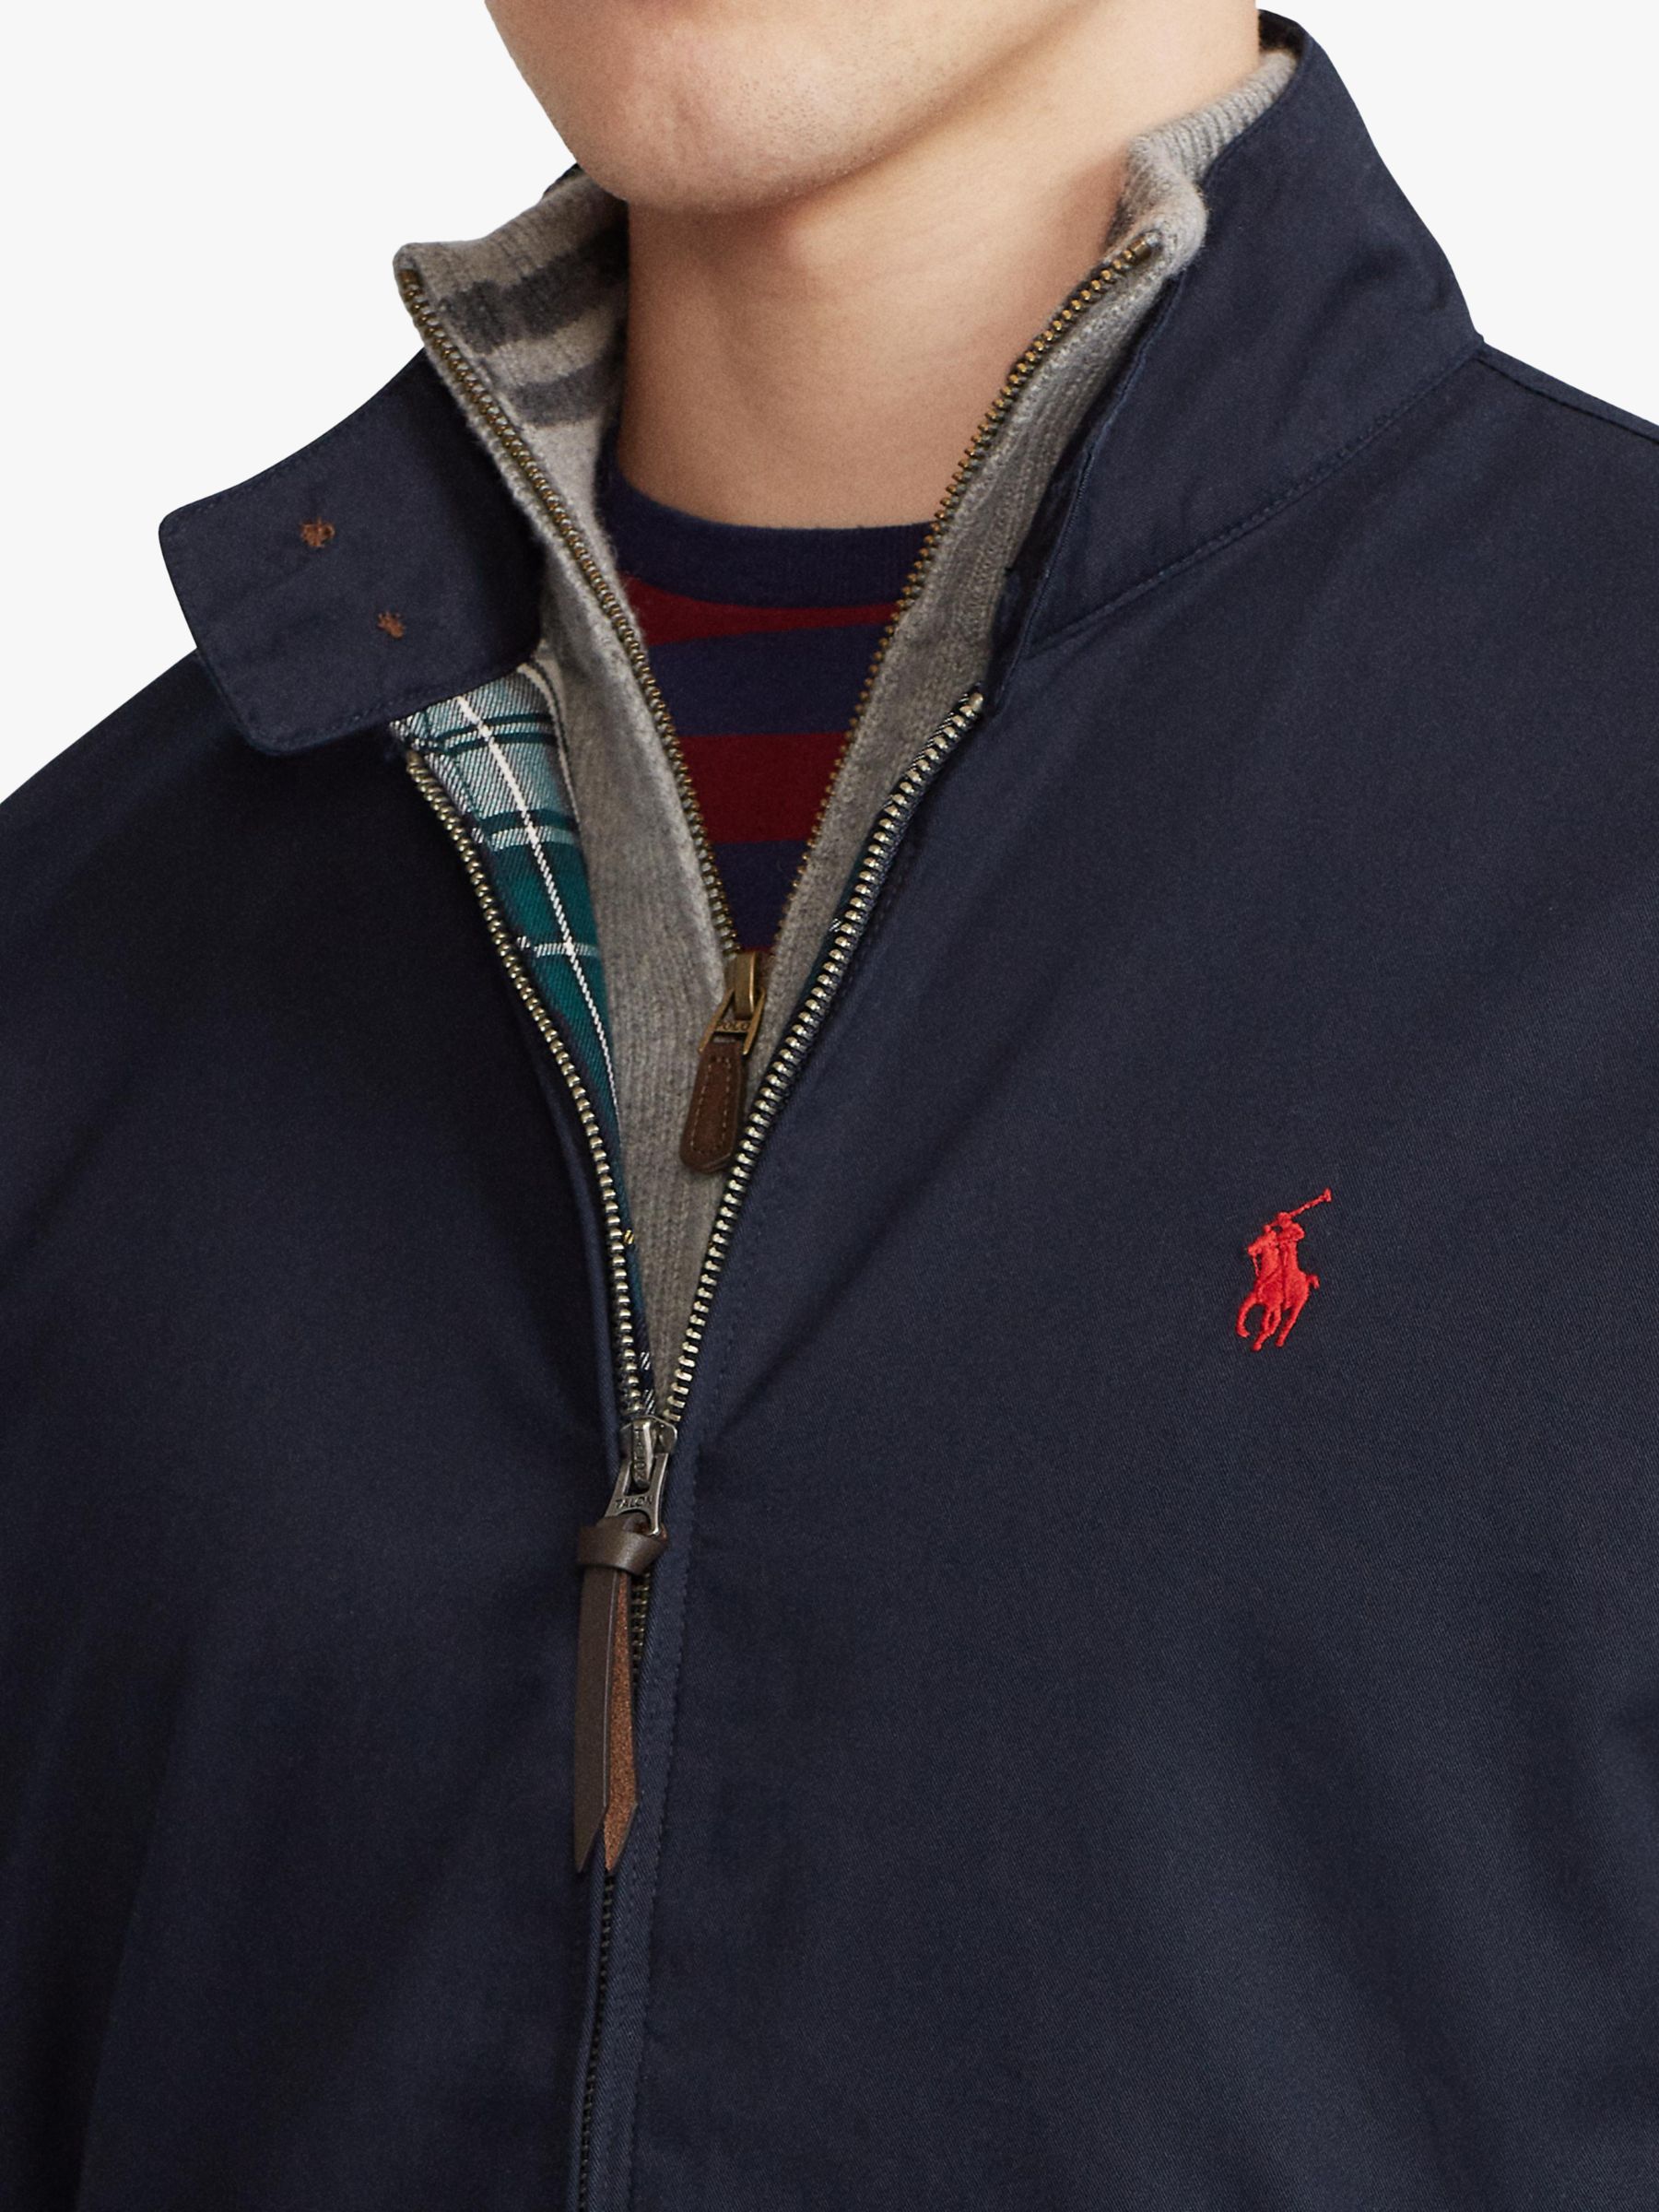 Polo Ralph Lauren Cotton Twill Lined Jacket, Collection Navy at John Lewis & Partners